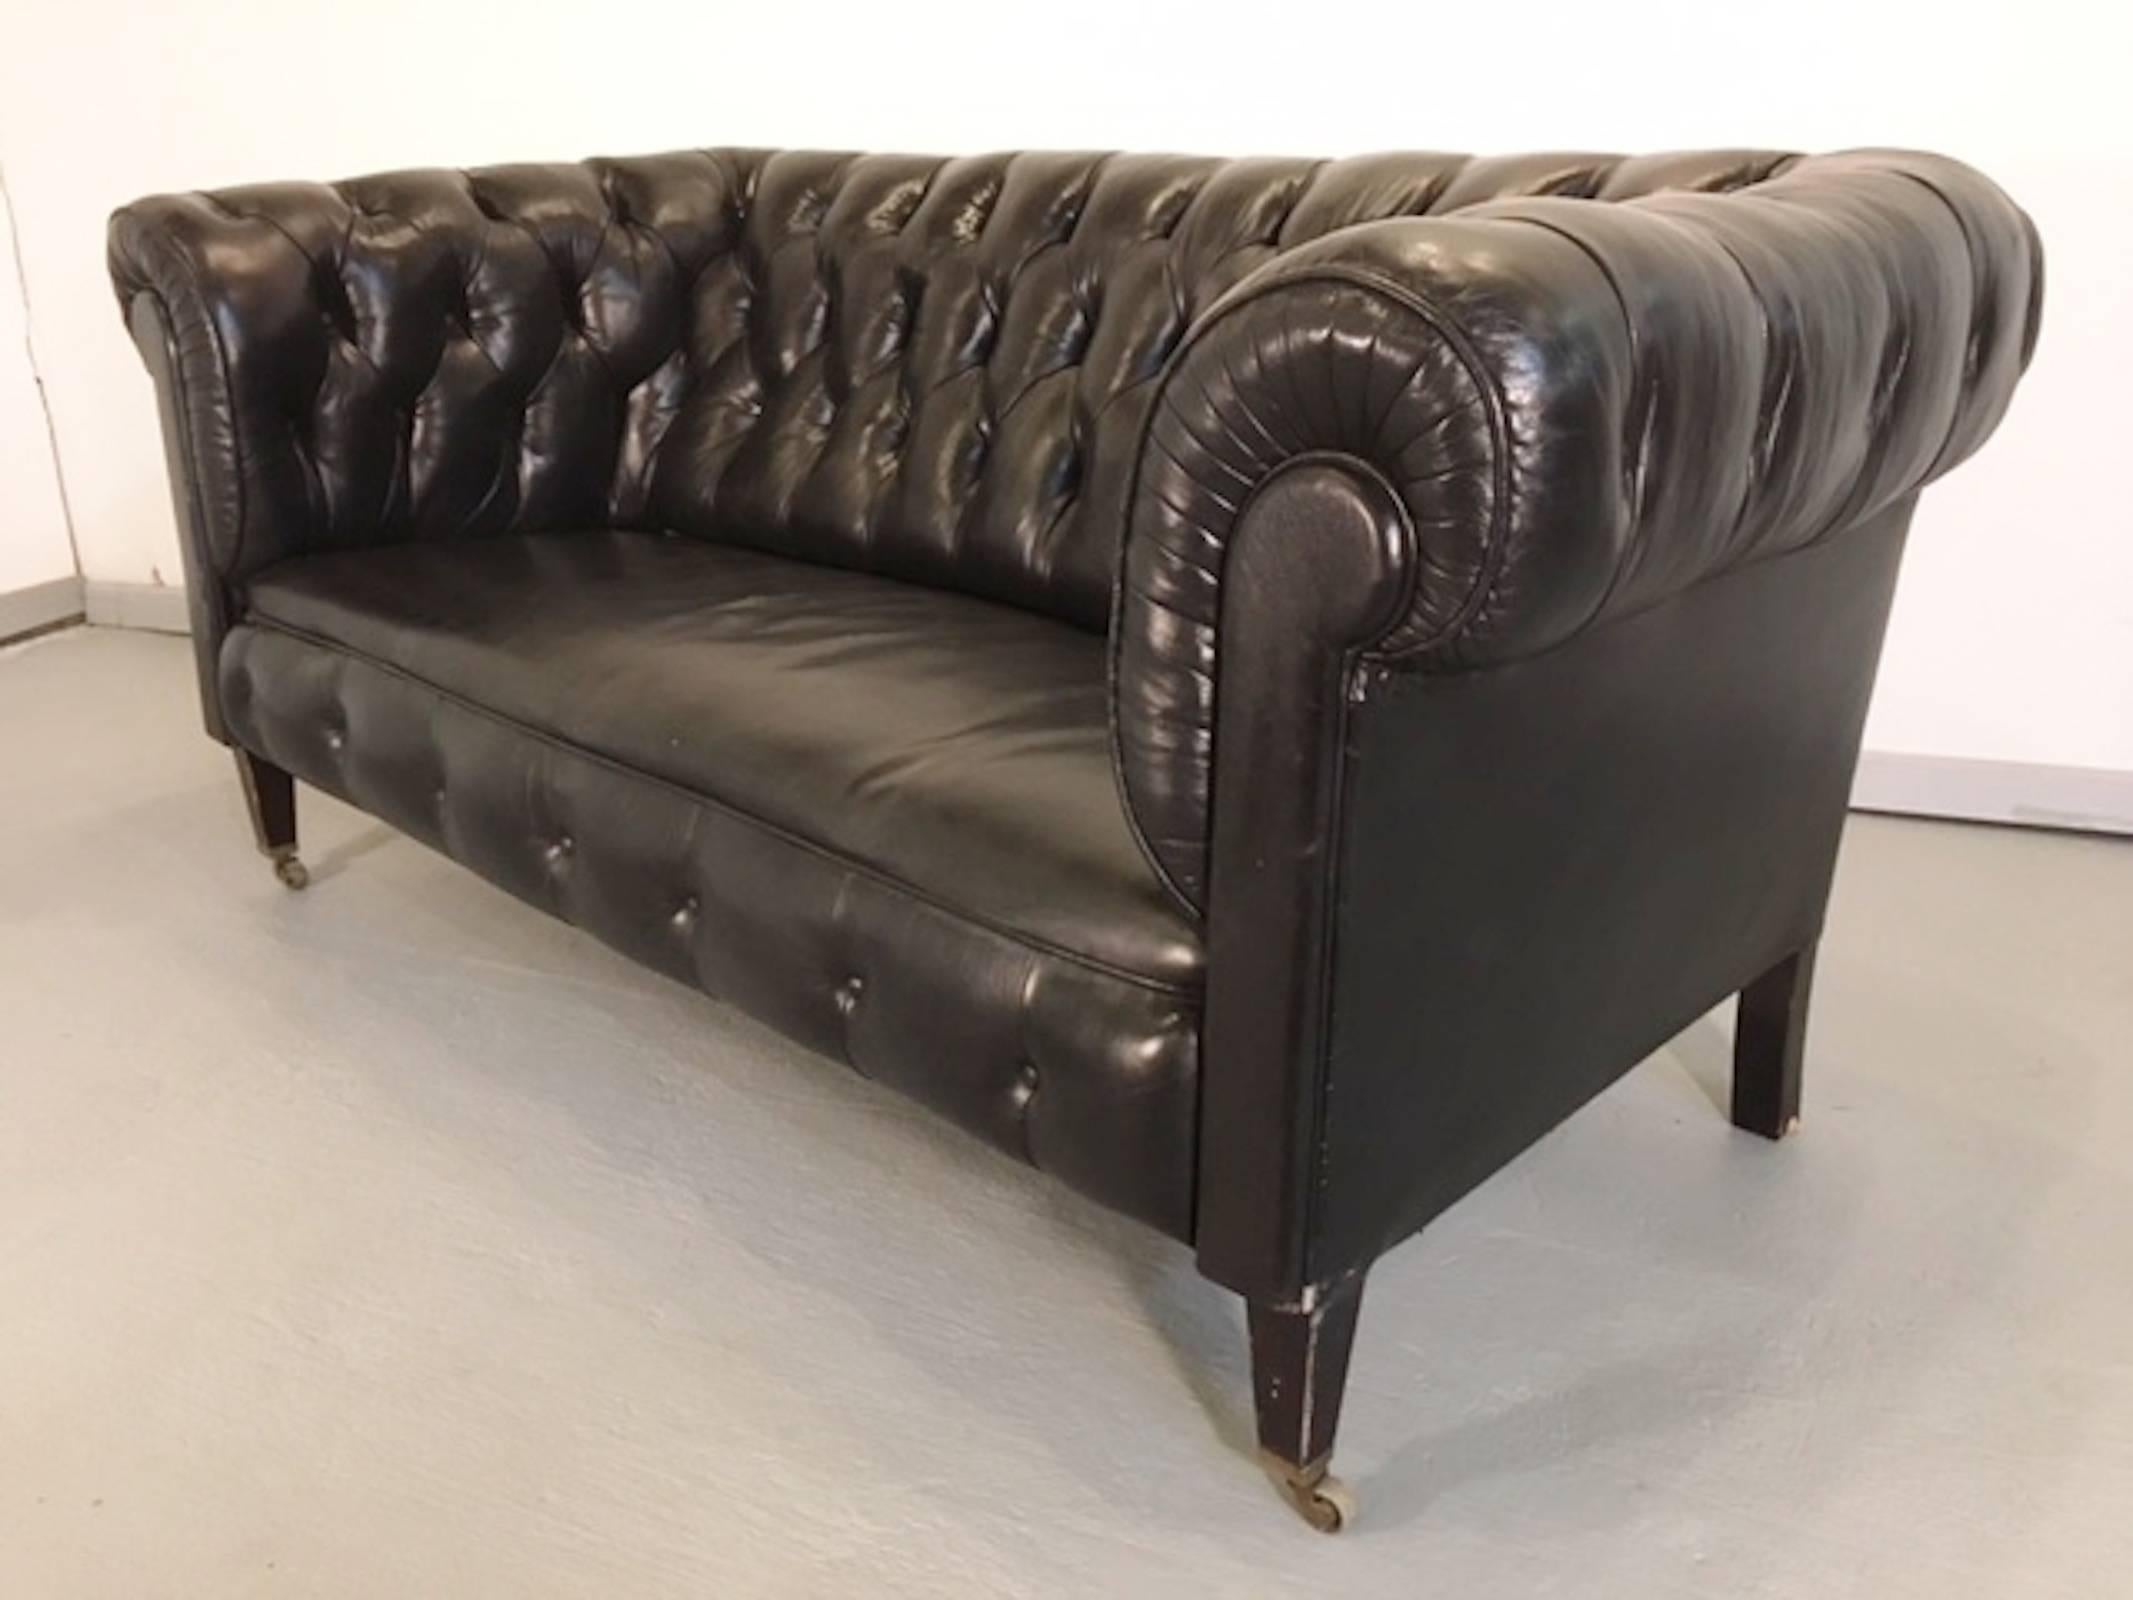 Vintage chesterfield sofa set with original black leather. Long sofa and two club chairs, complete with tufted backs, rolled arms and caster legs.
Measures: Sofa: 32” H x 72" W x 34" D seat height 18"
chairs: 32" H x 37.5"